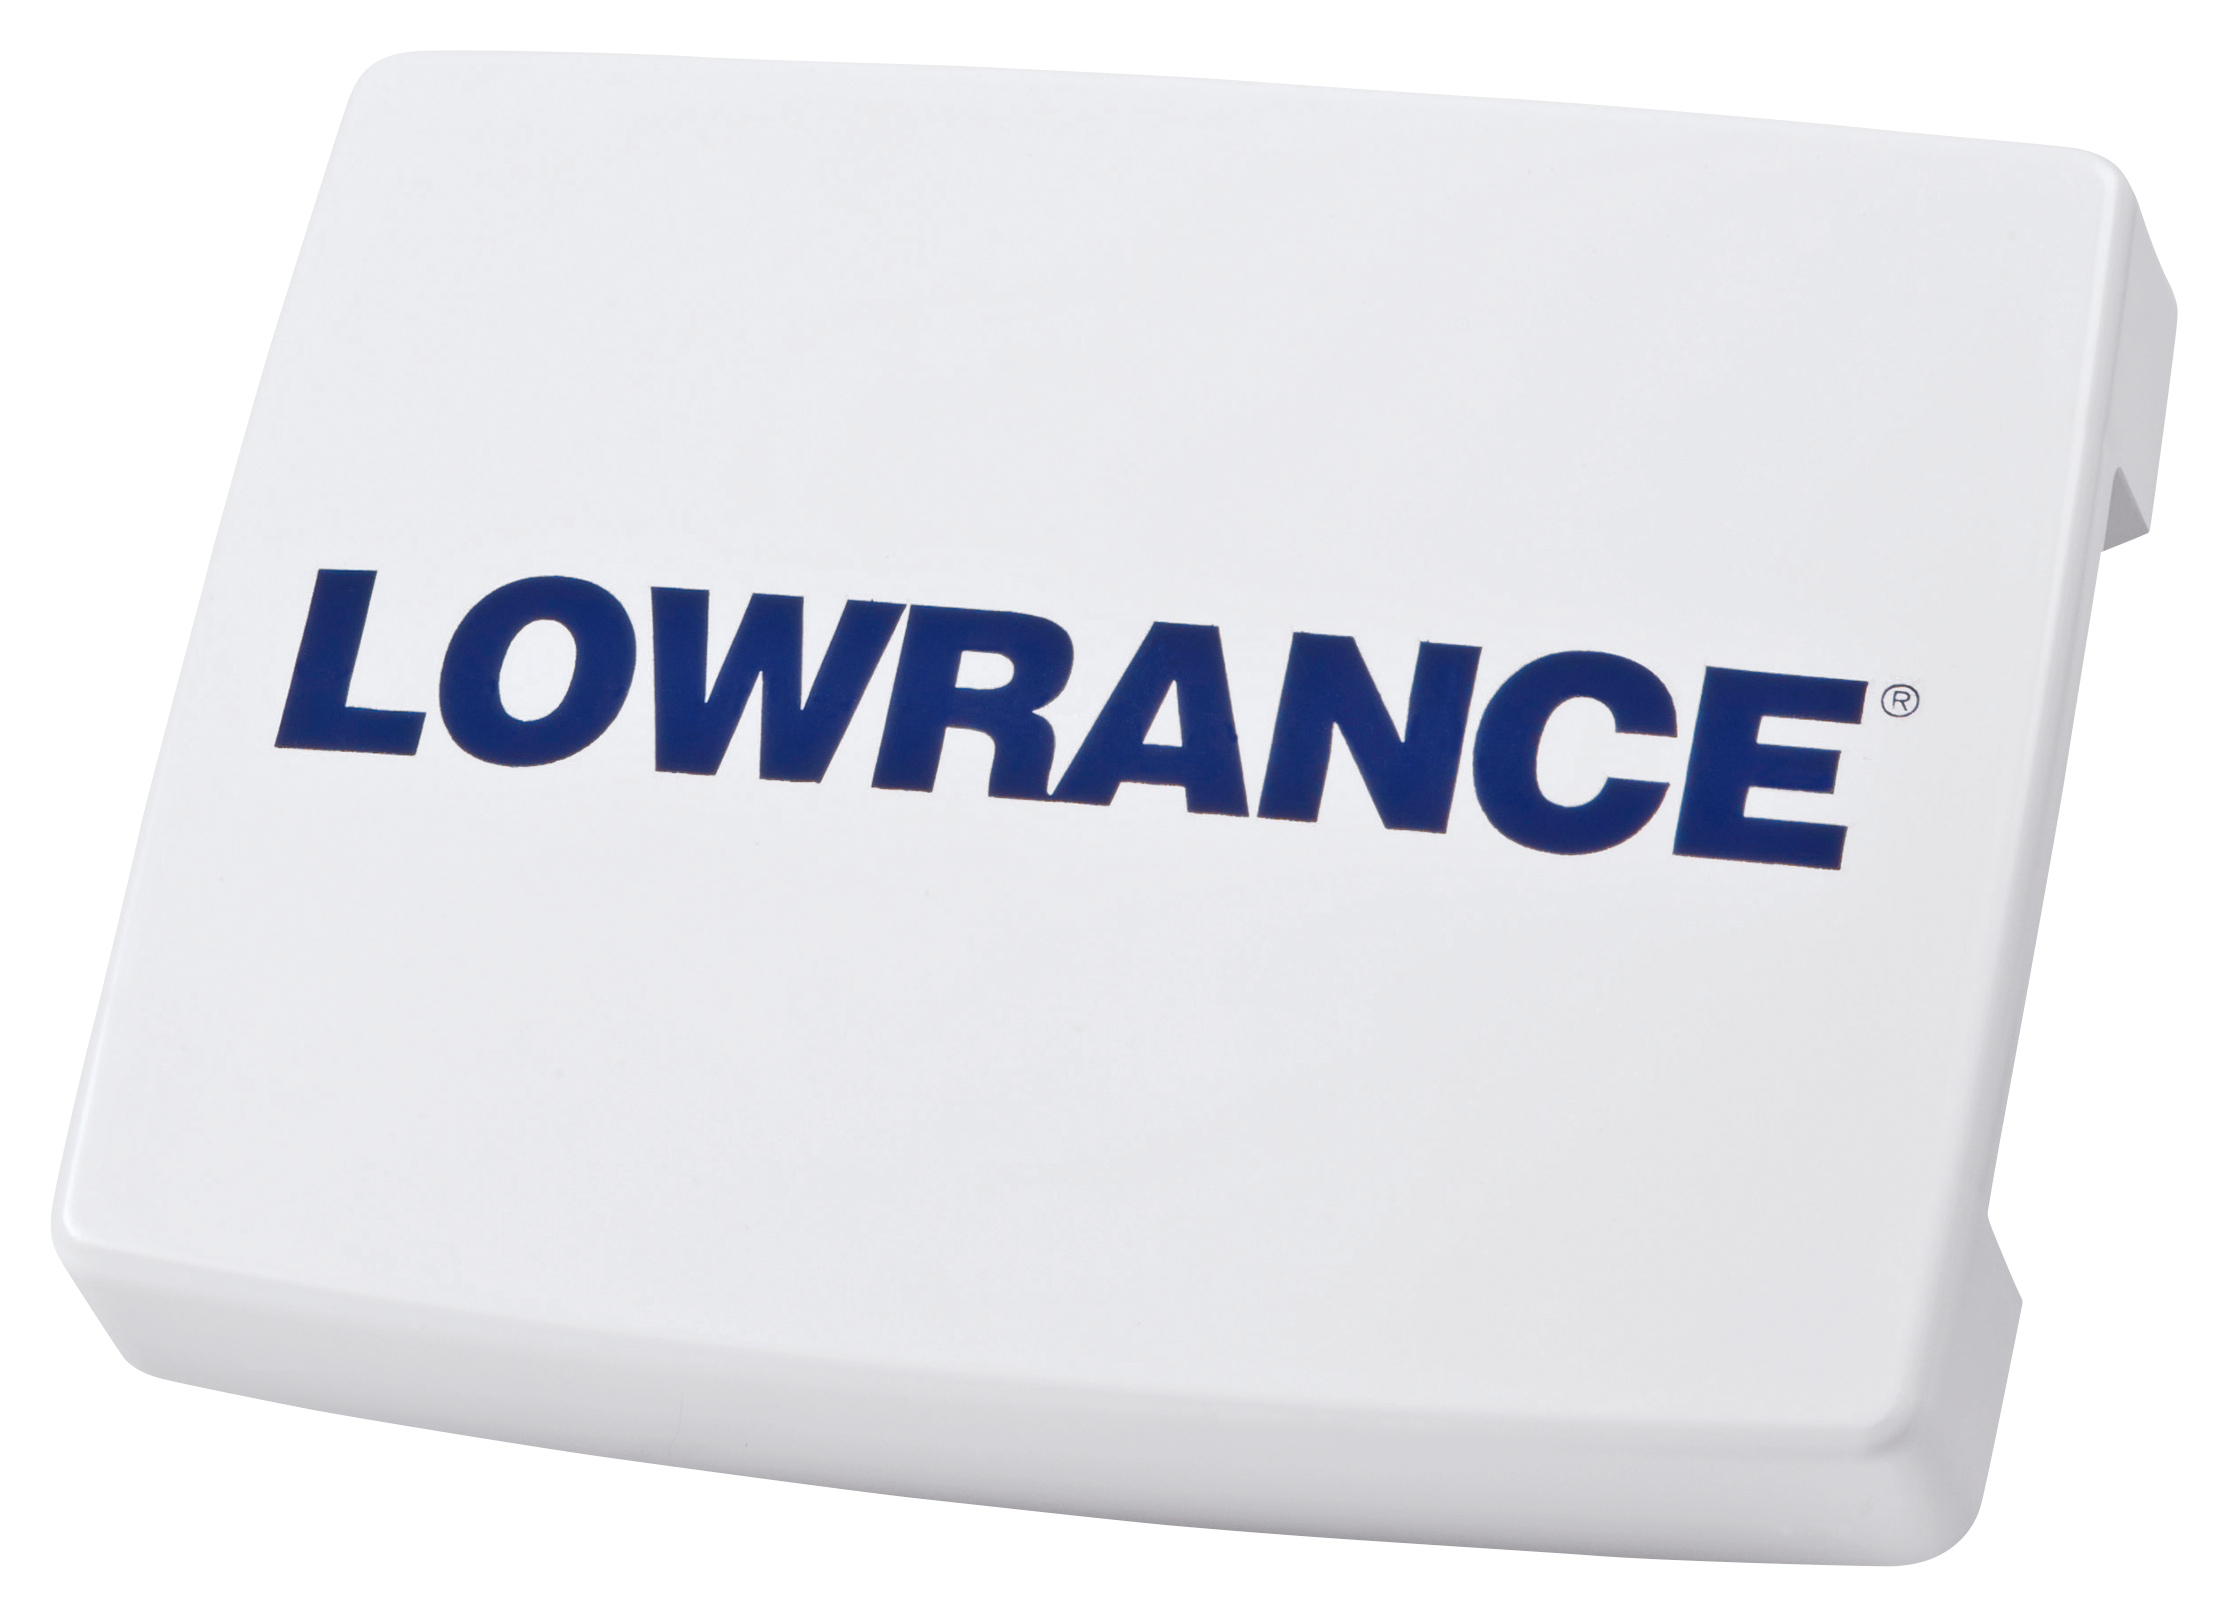 Lowrance Sun Cover for Lowrance 5 Mark, Elite and Hook Series